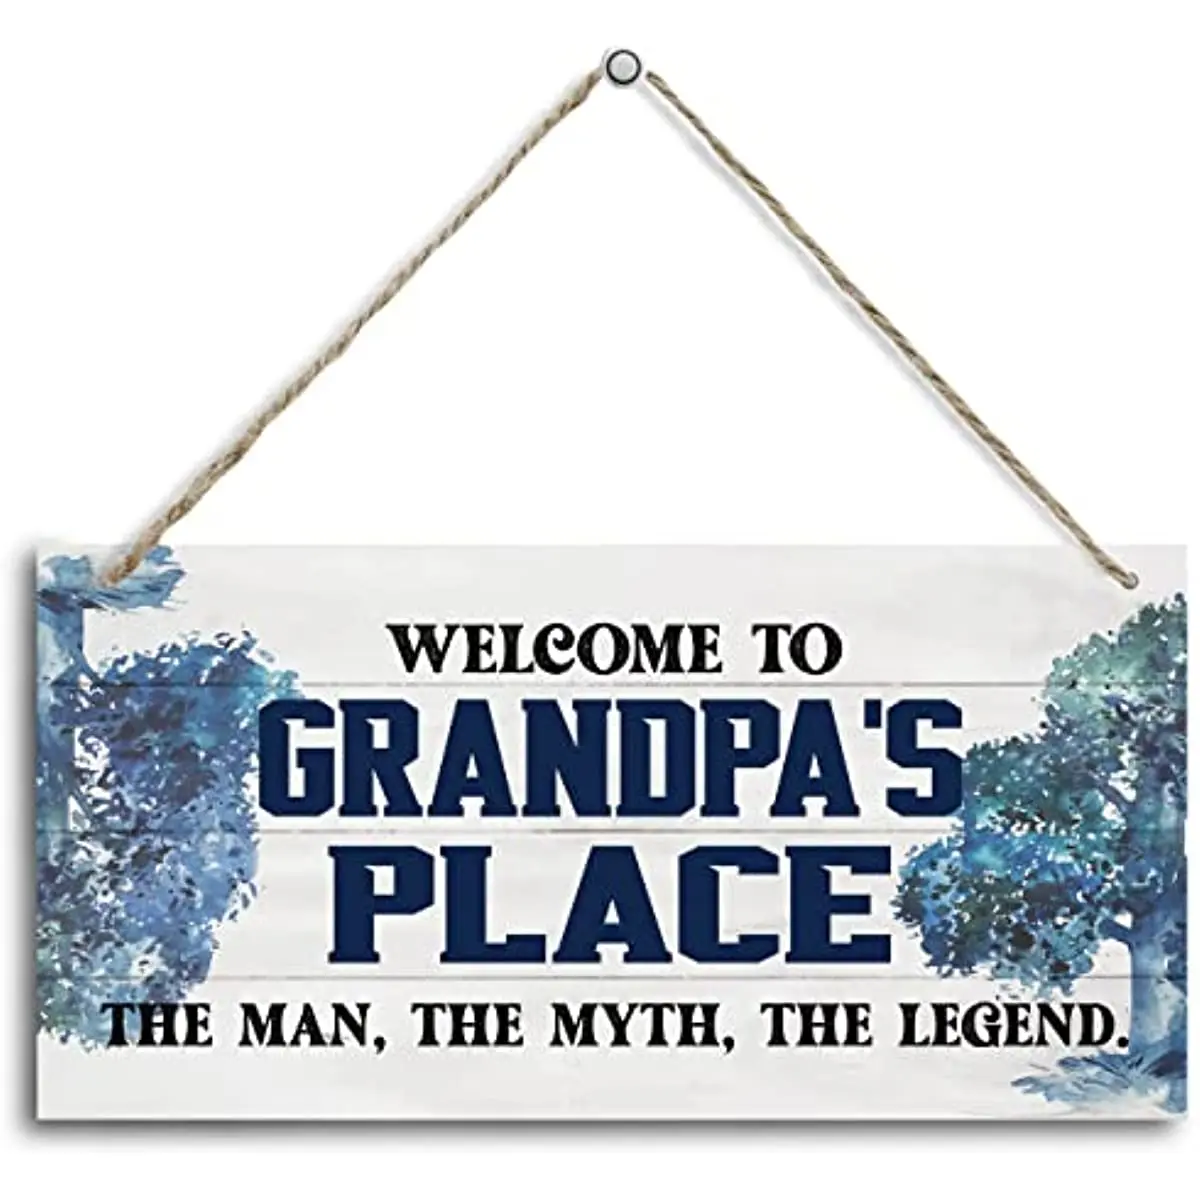 

Welcome to Grandpa's Place The Man, The Myth, The Legend Wood Decor Sign Home Decor Wood Sign Plaque 12" x 6" Hanging Wall Art